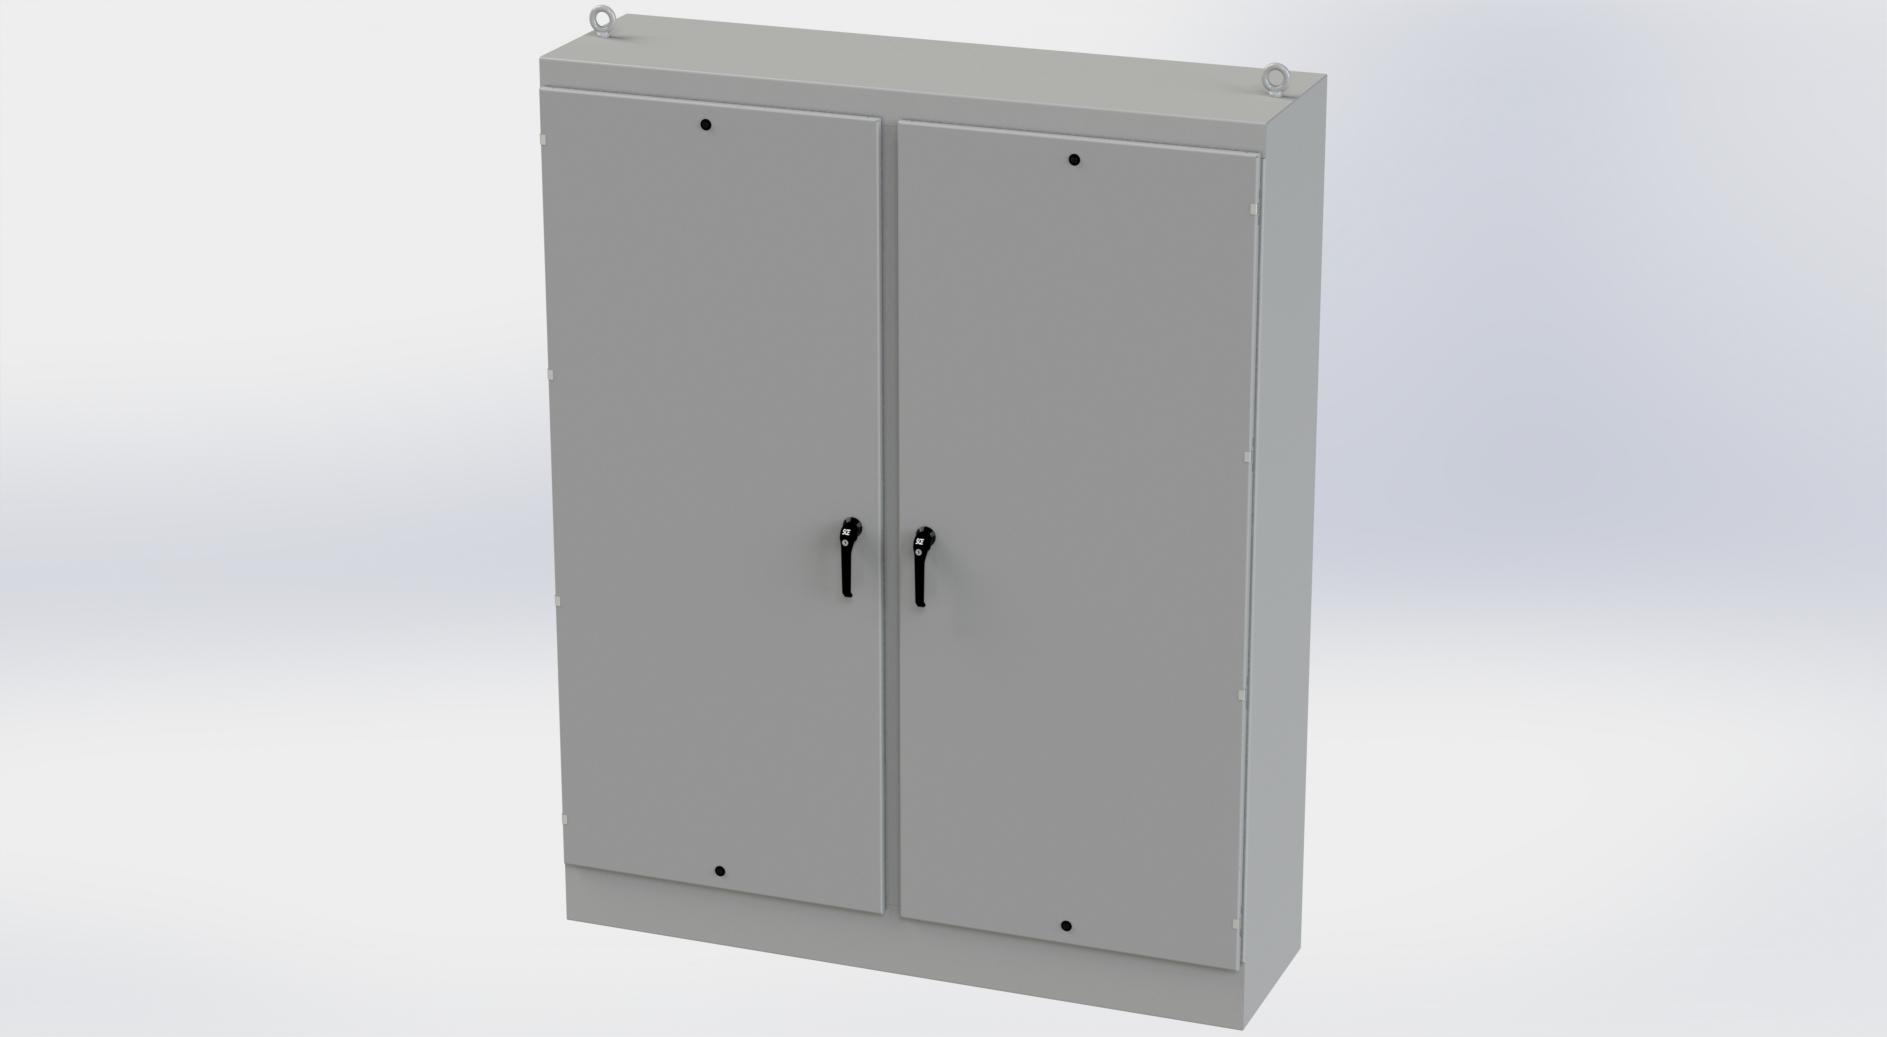 Saginaw Control SCE-90EL7220FSD EL FSD Enclosure, Height:90.00", Width:72.00", Depth:20.00", ANSI-61 gray finish Inside and outside. Optional sub-panels are powder coated white.